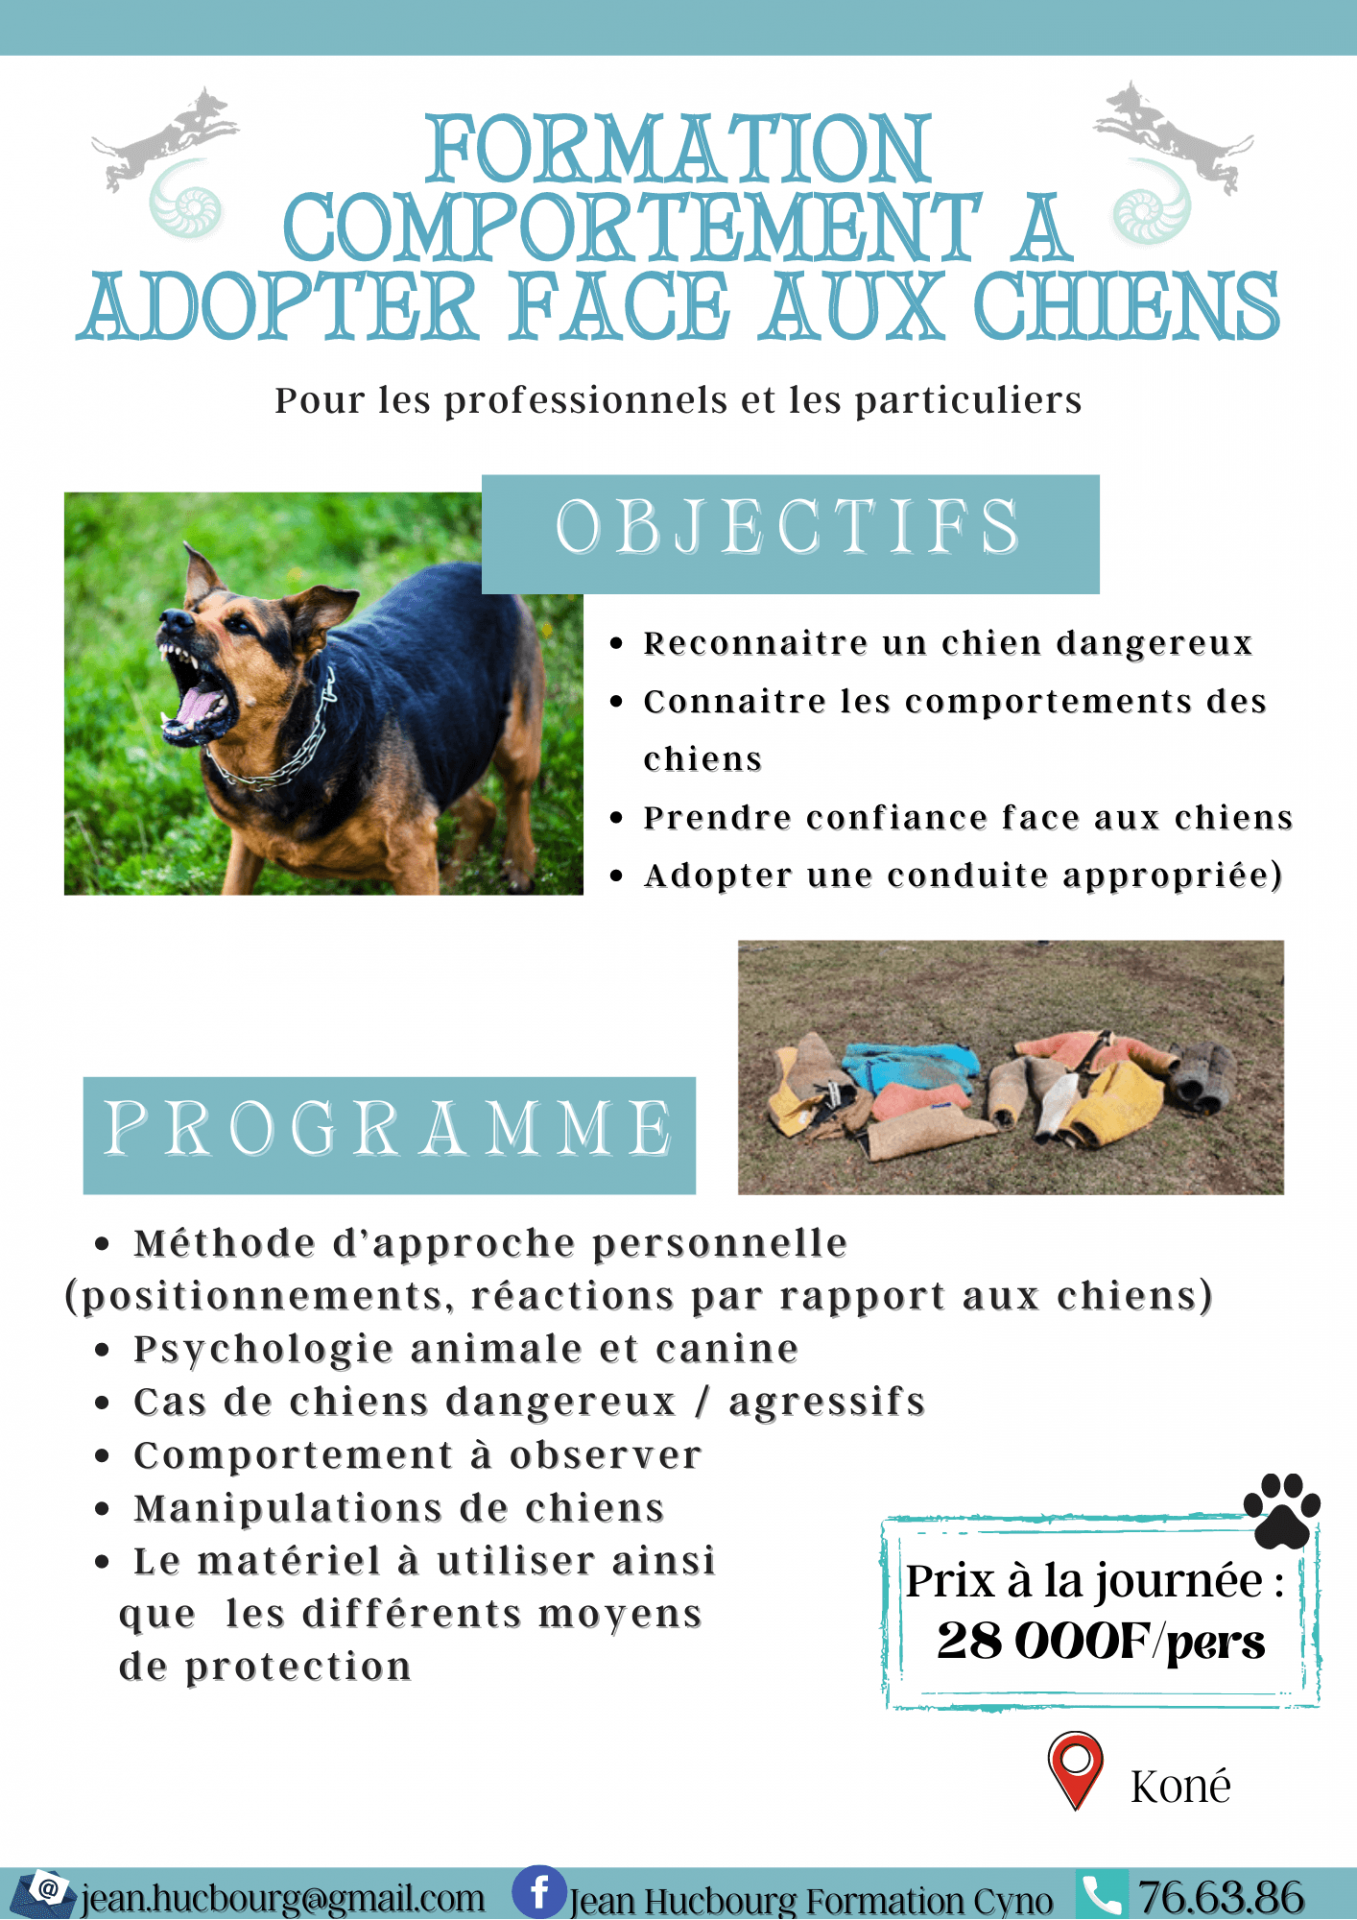 Formation comportement a adopter face aux chiens